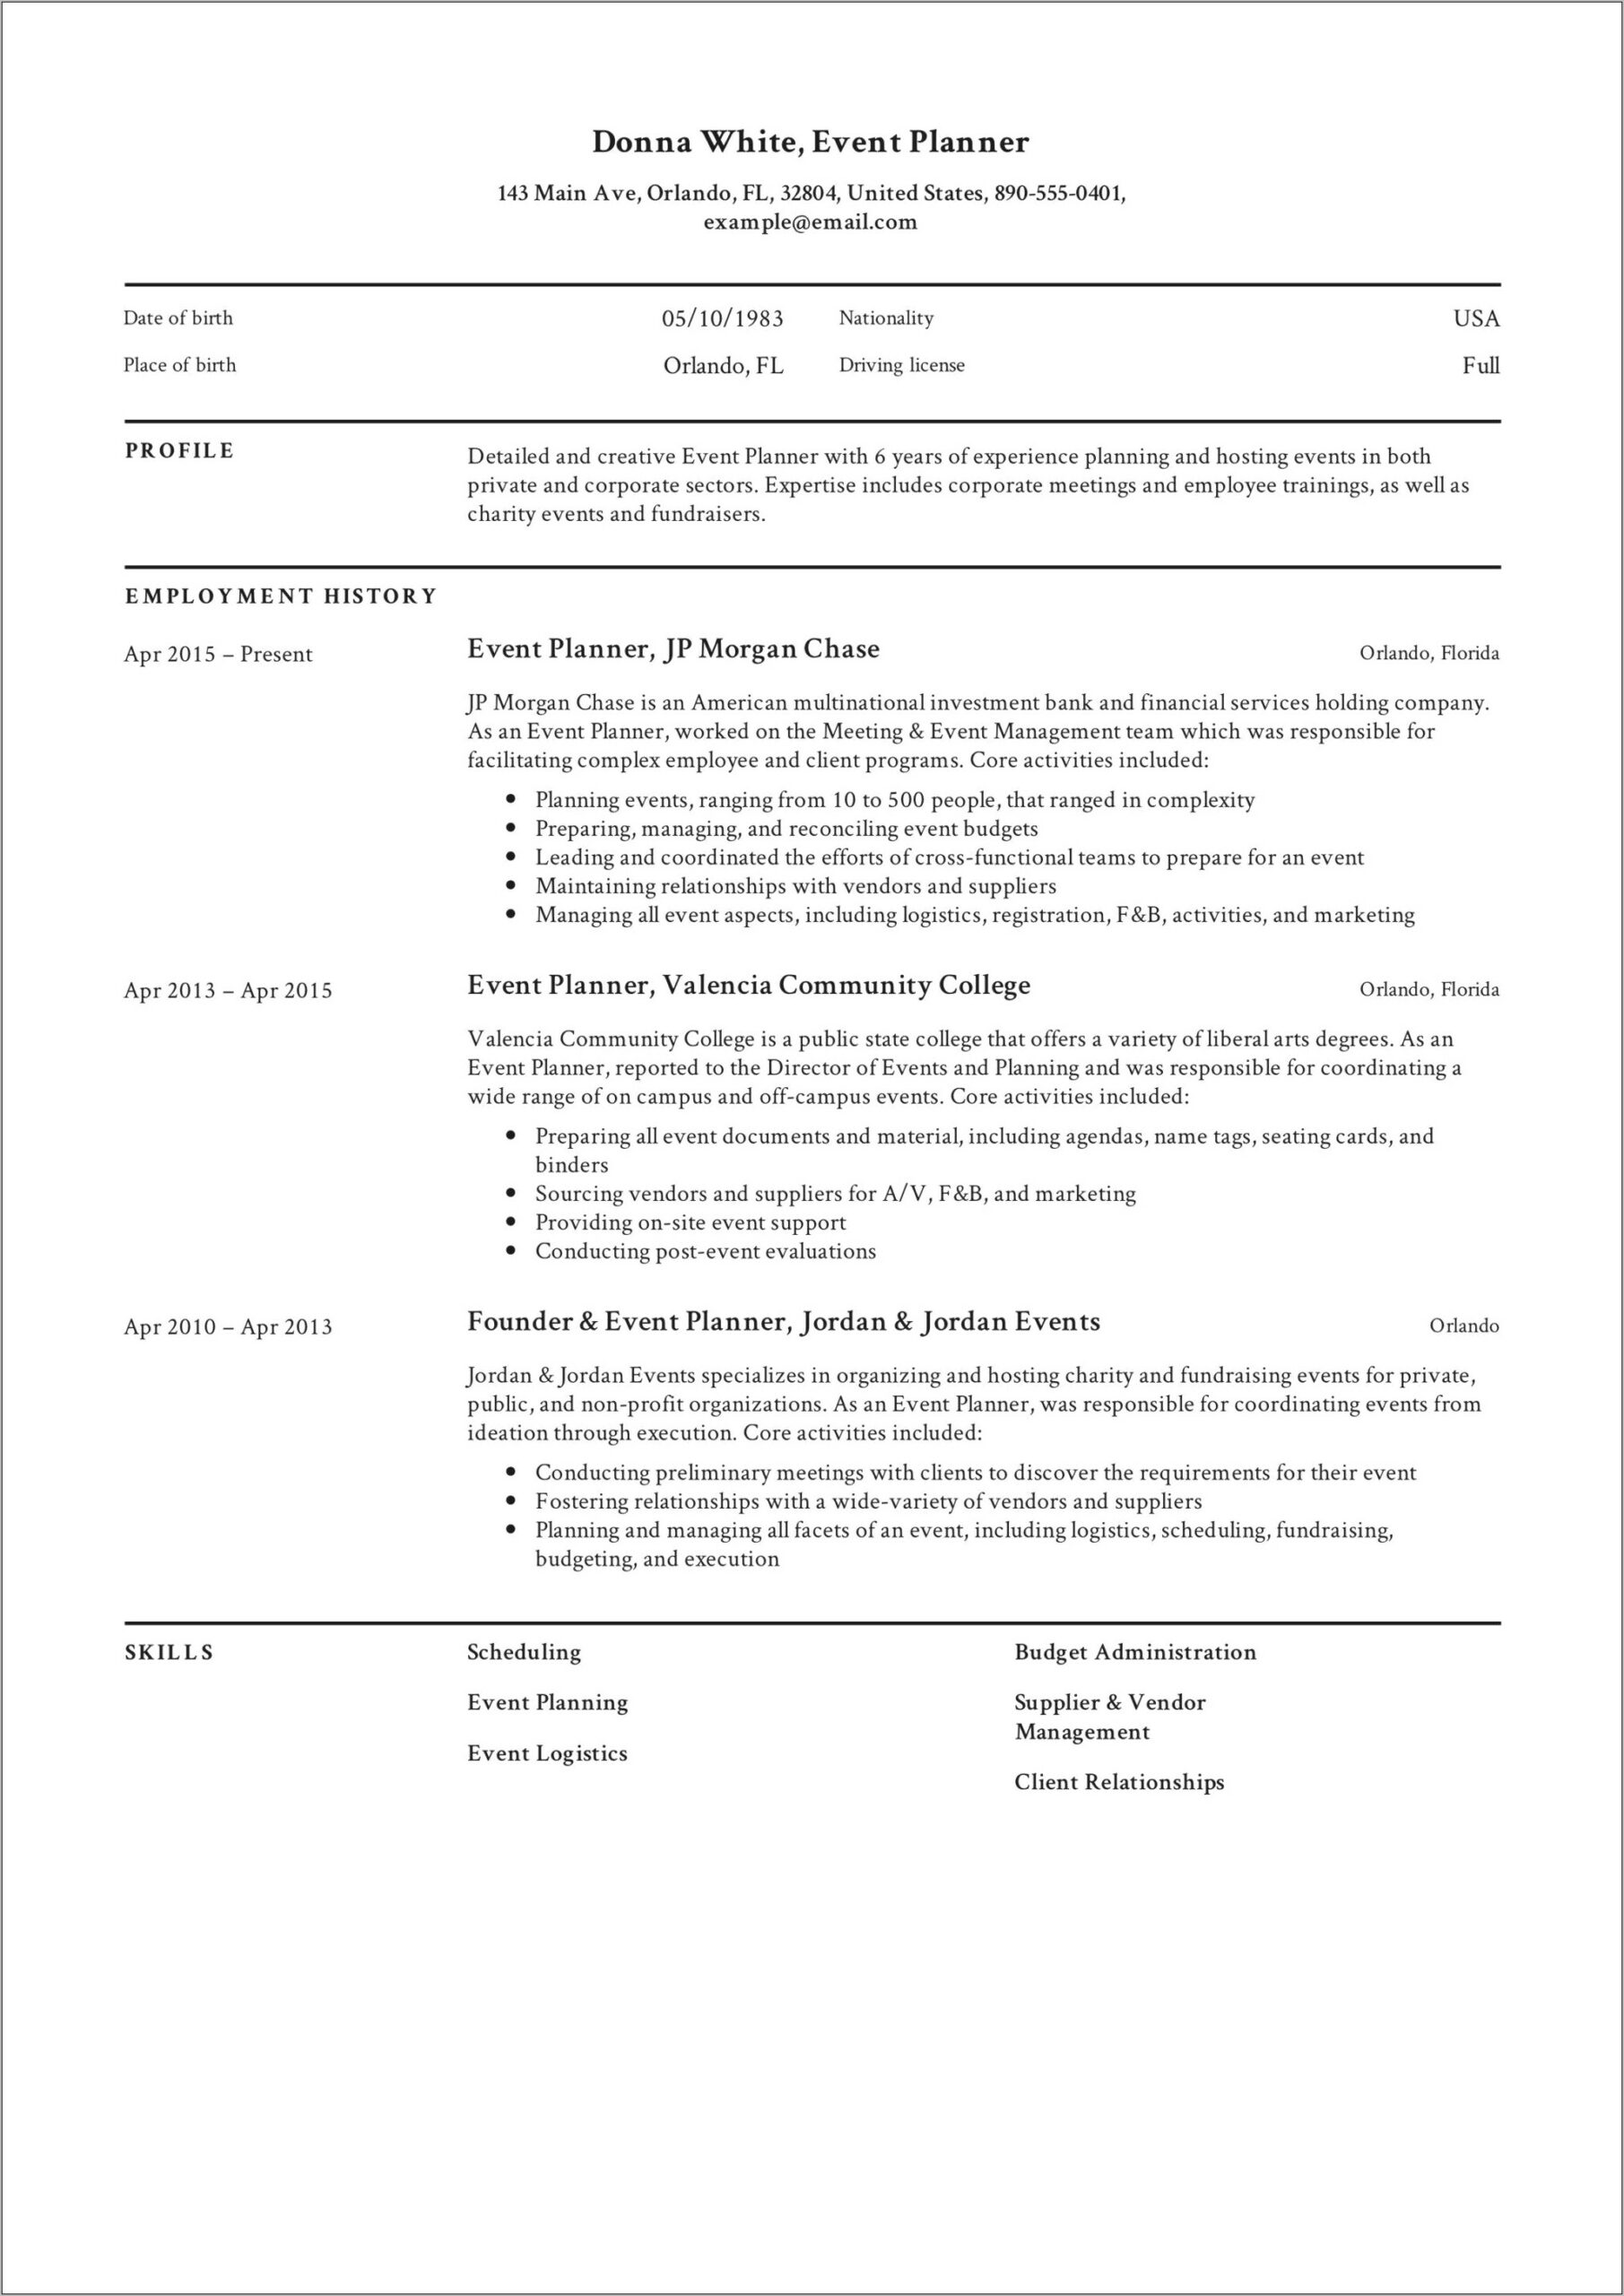 Resume Examples For Event Plannners